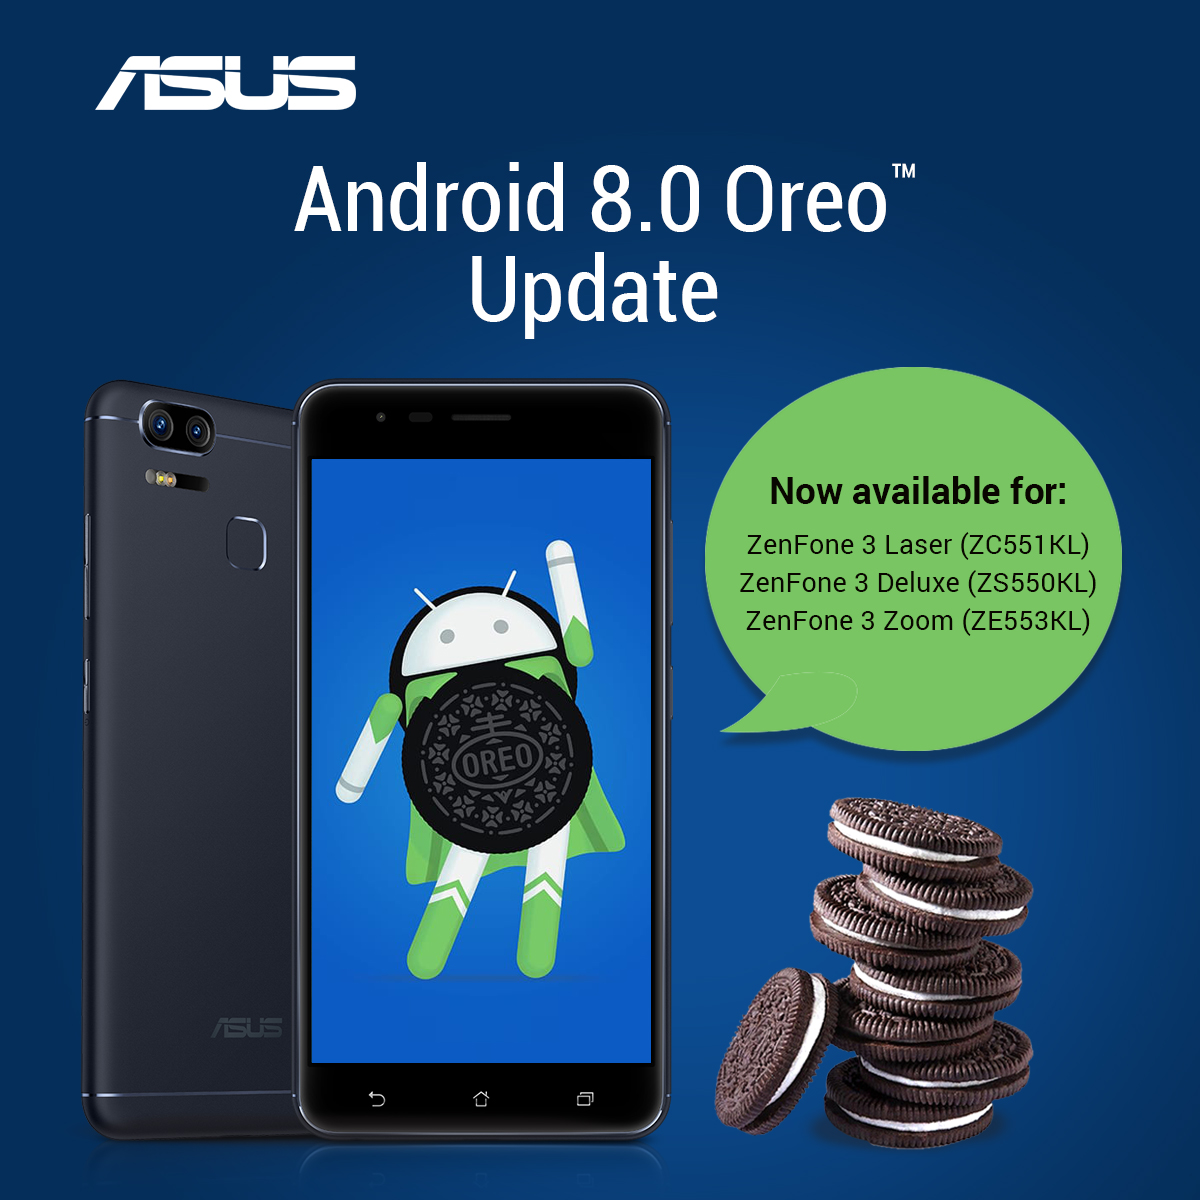 Android 8.0 OREO Update for ZenFone 3 Series